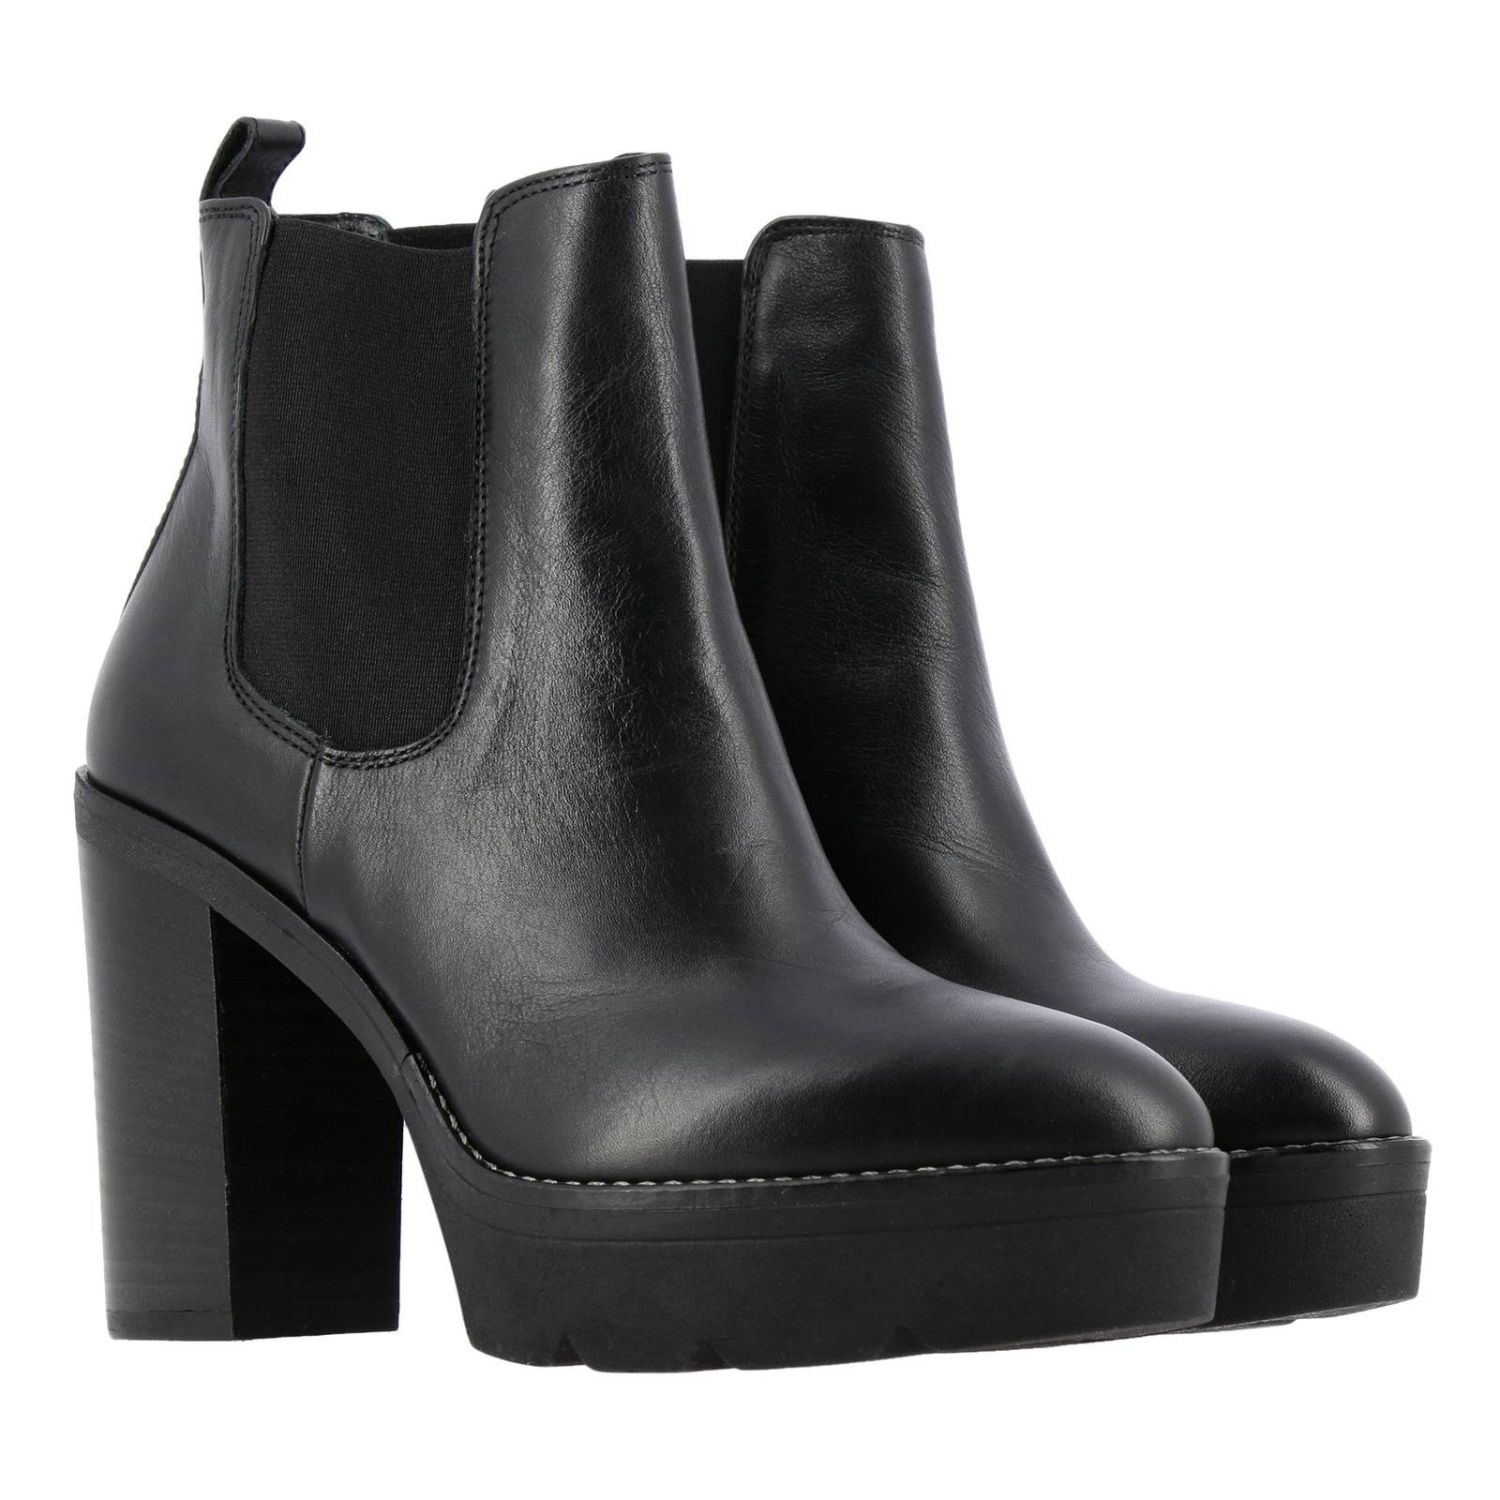 Janet & Janet Outlet: Shoes women - Black | Heeled Booties Janet ...